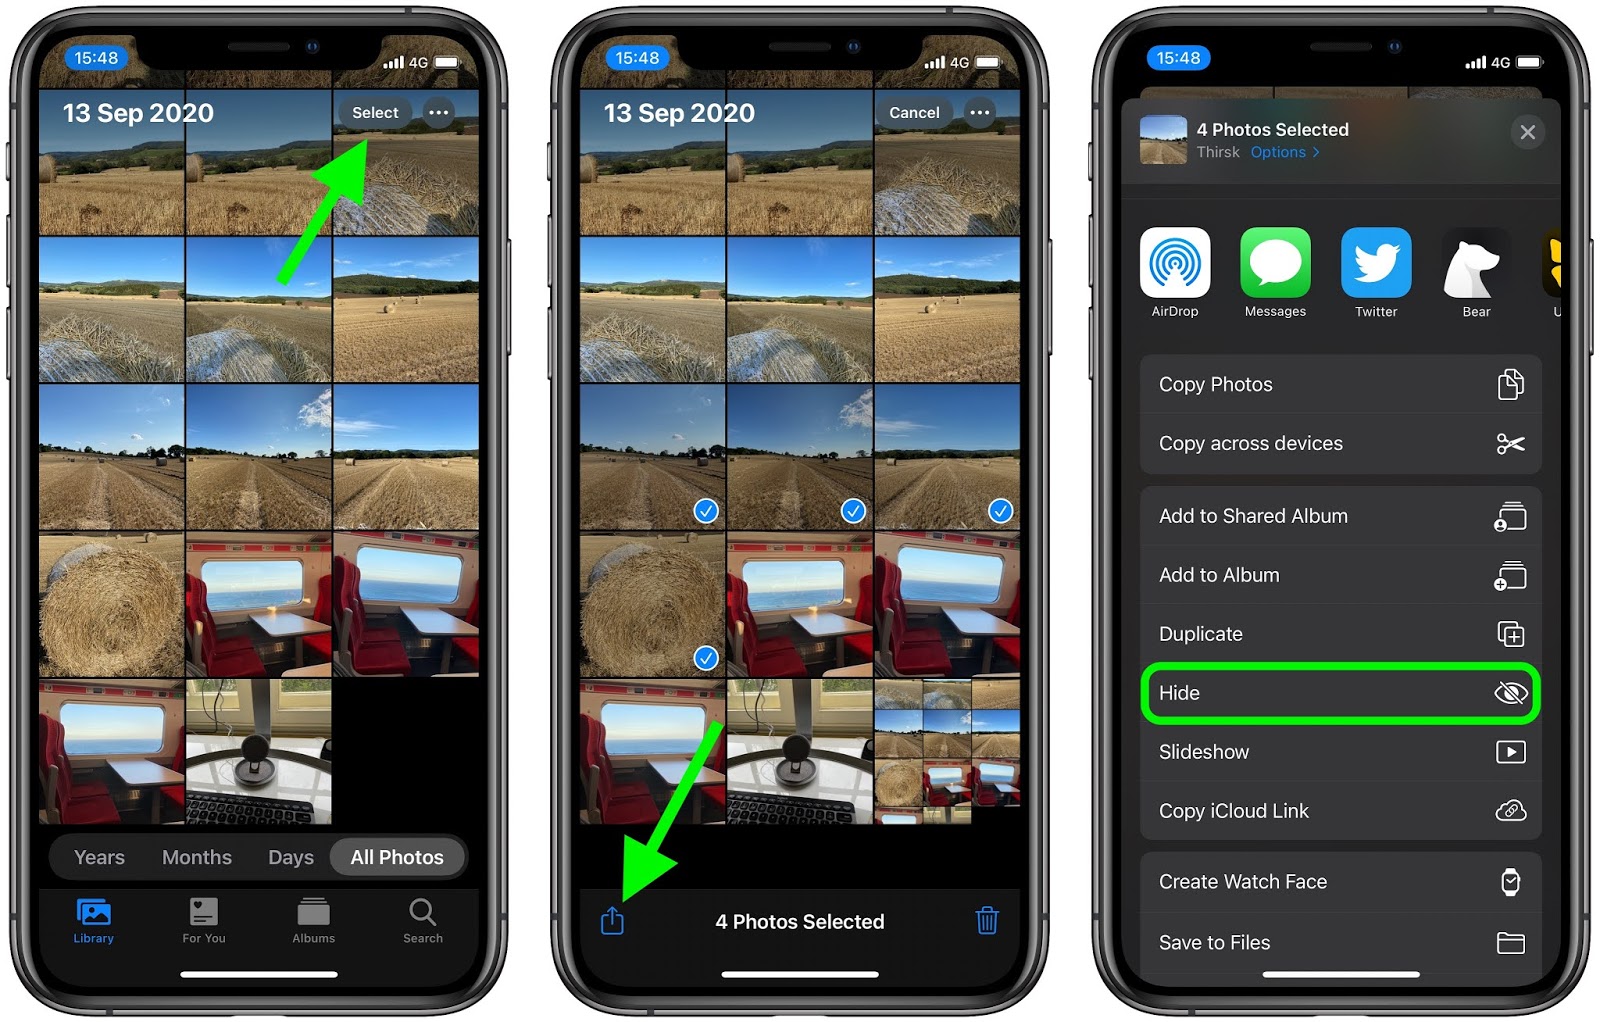 How to hide photos in iPhone